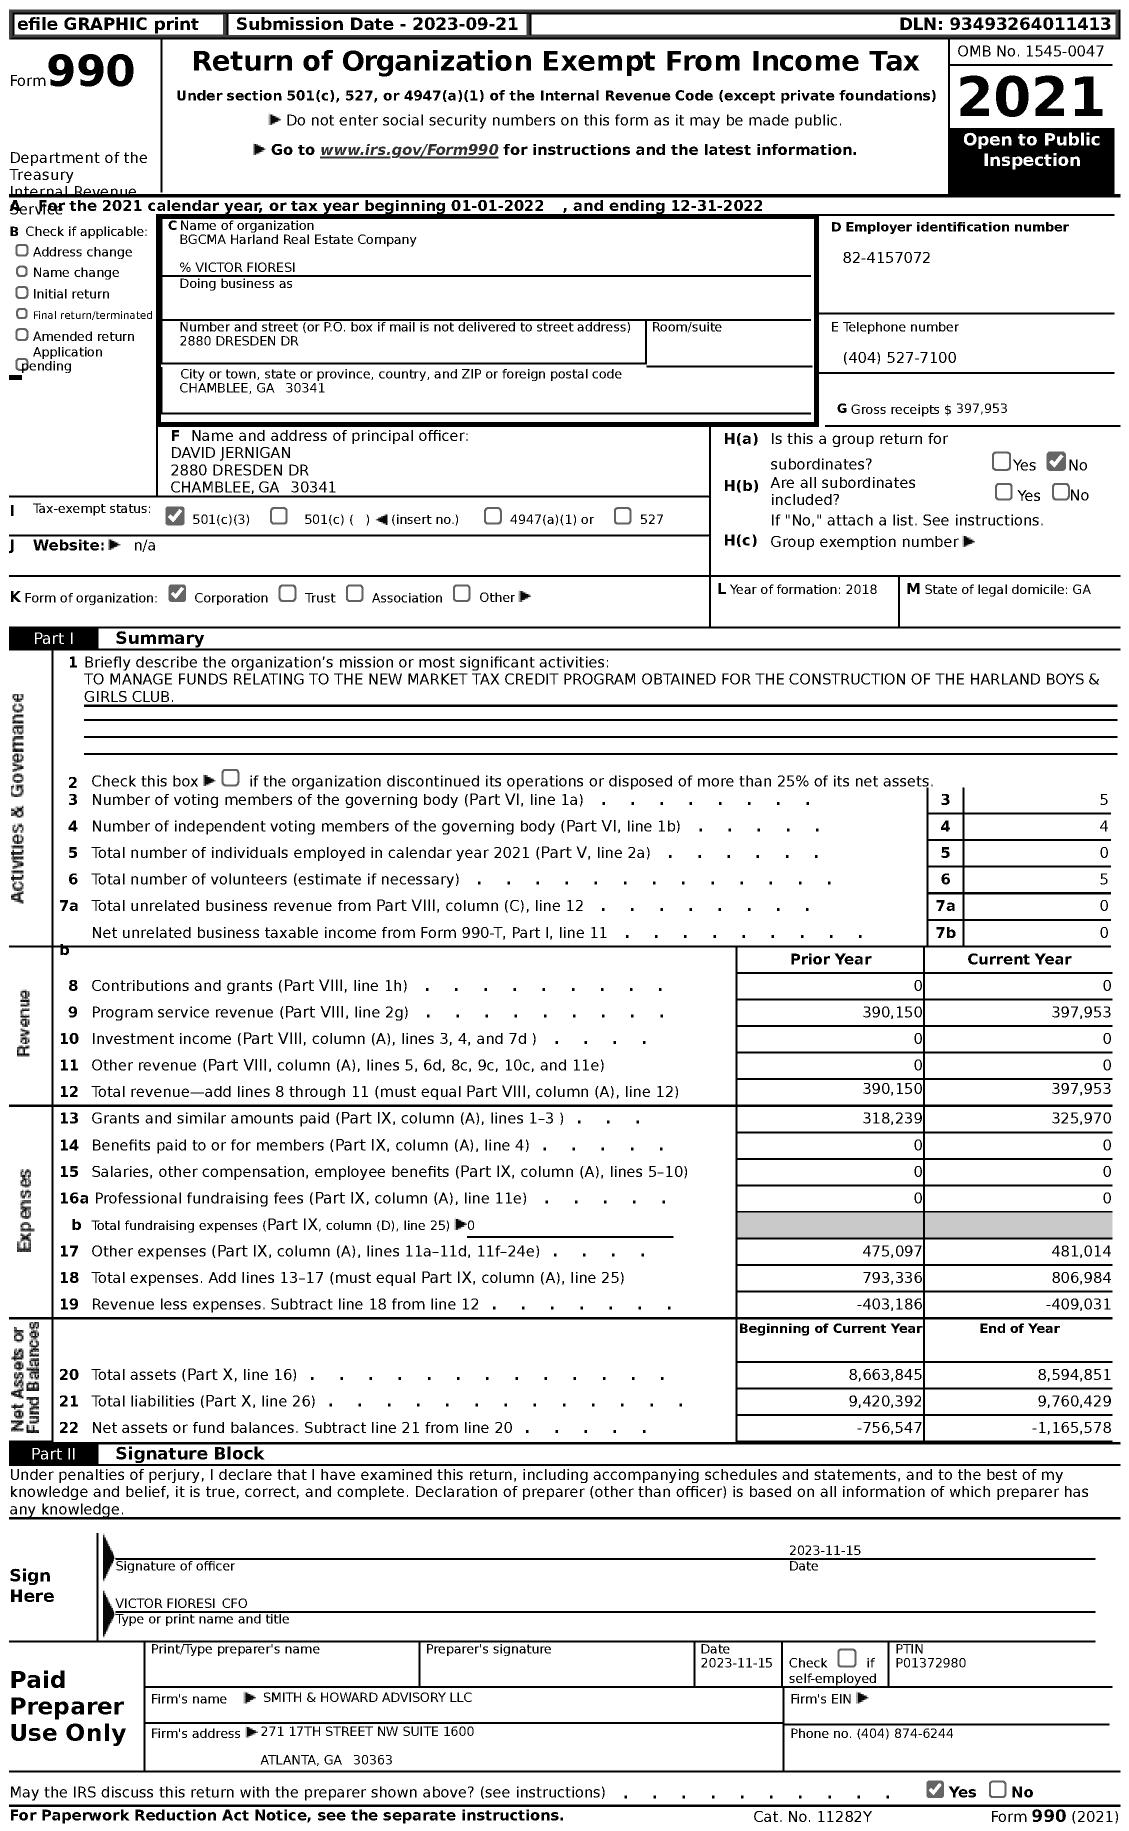 Image of first page of 2022 Form 990 for BGCMA Harland Real Estate Company